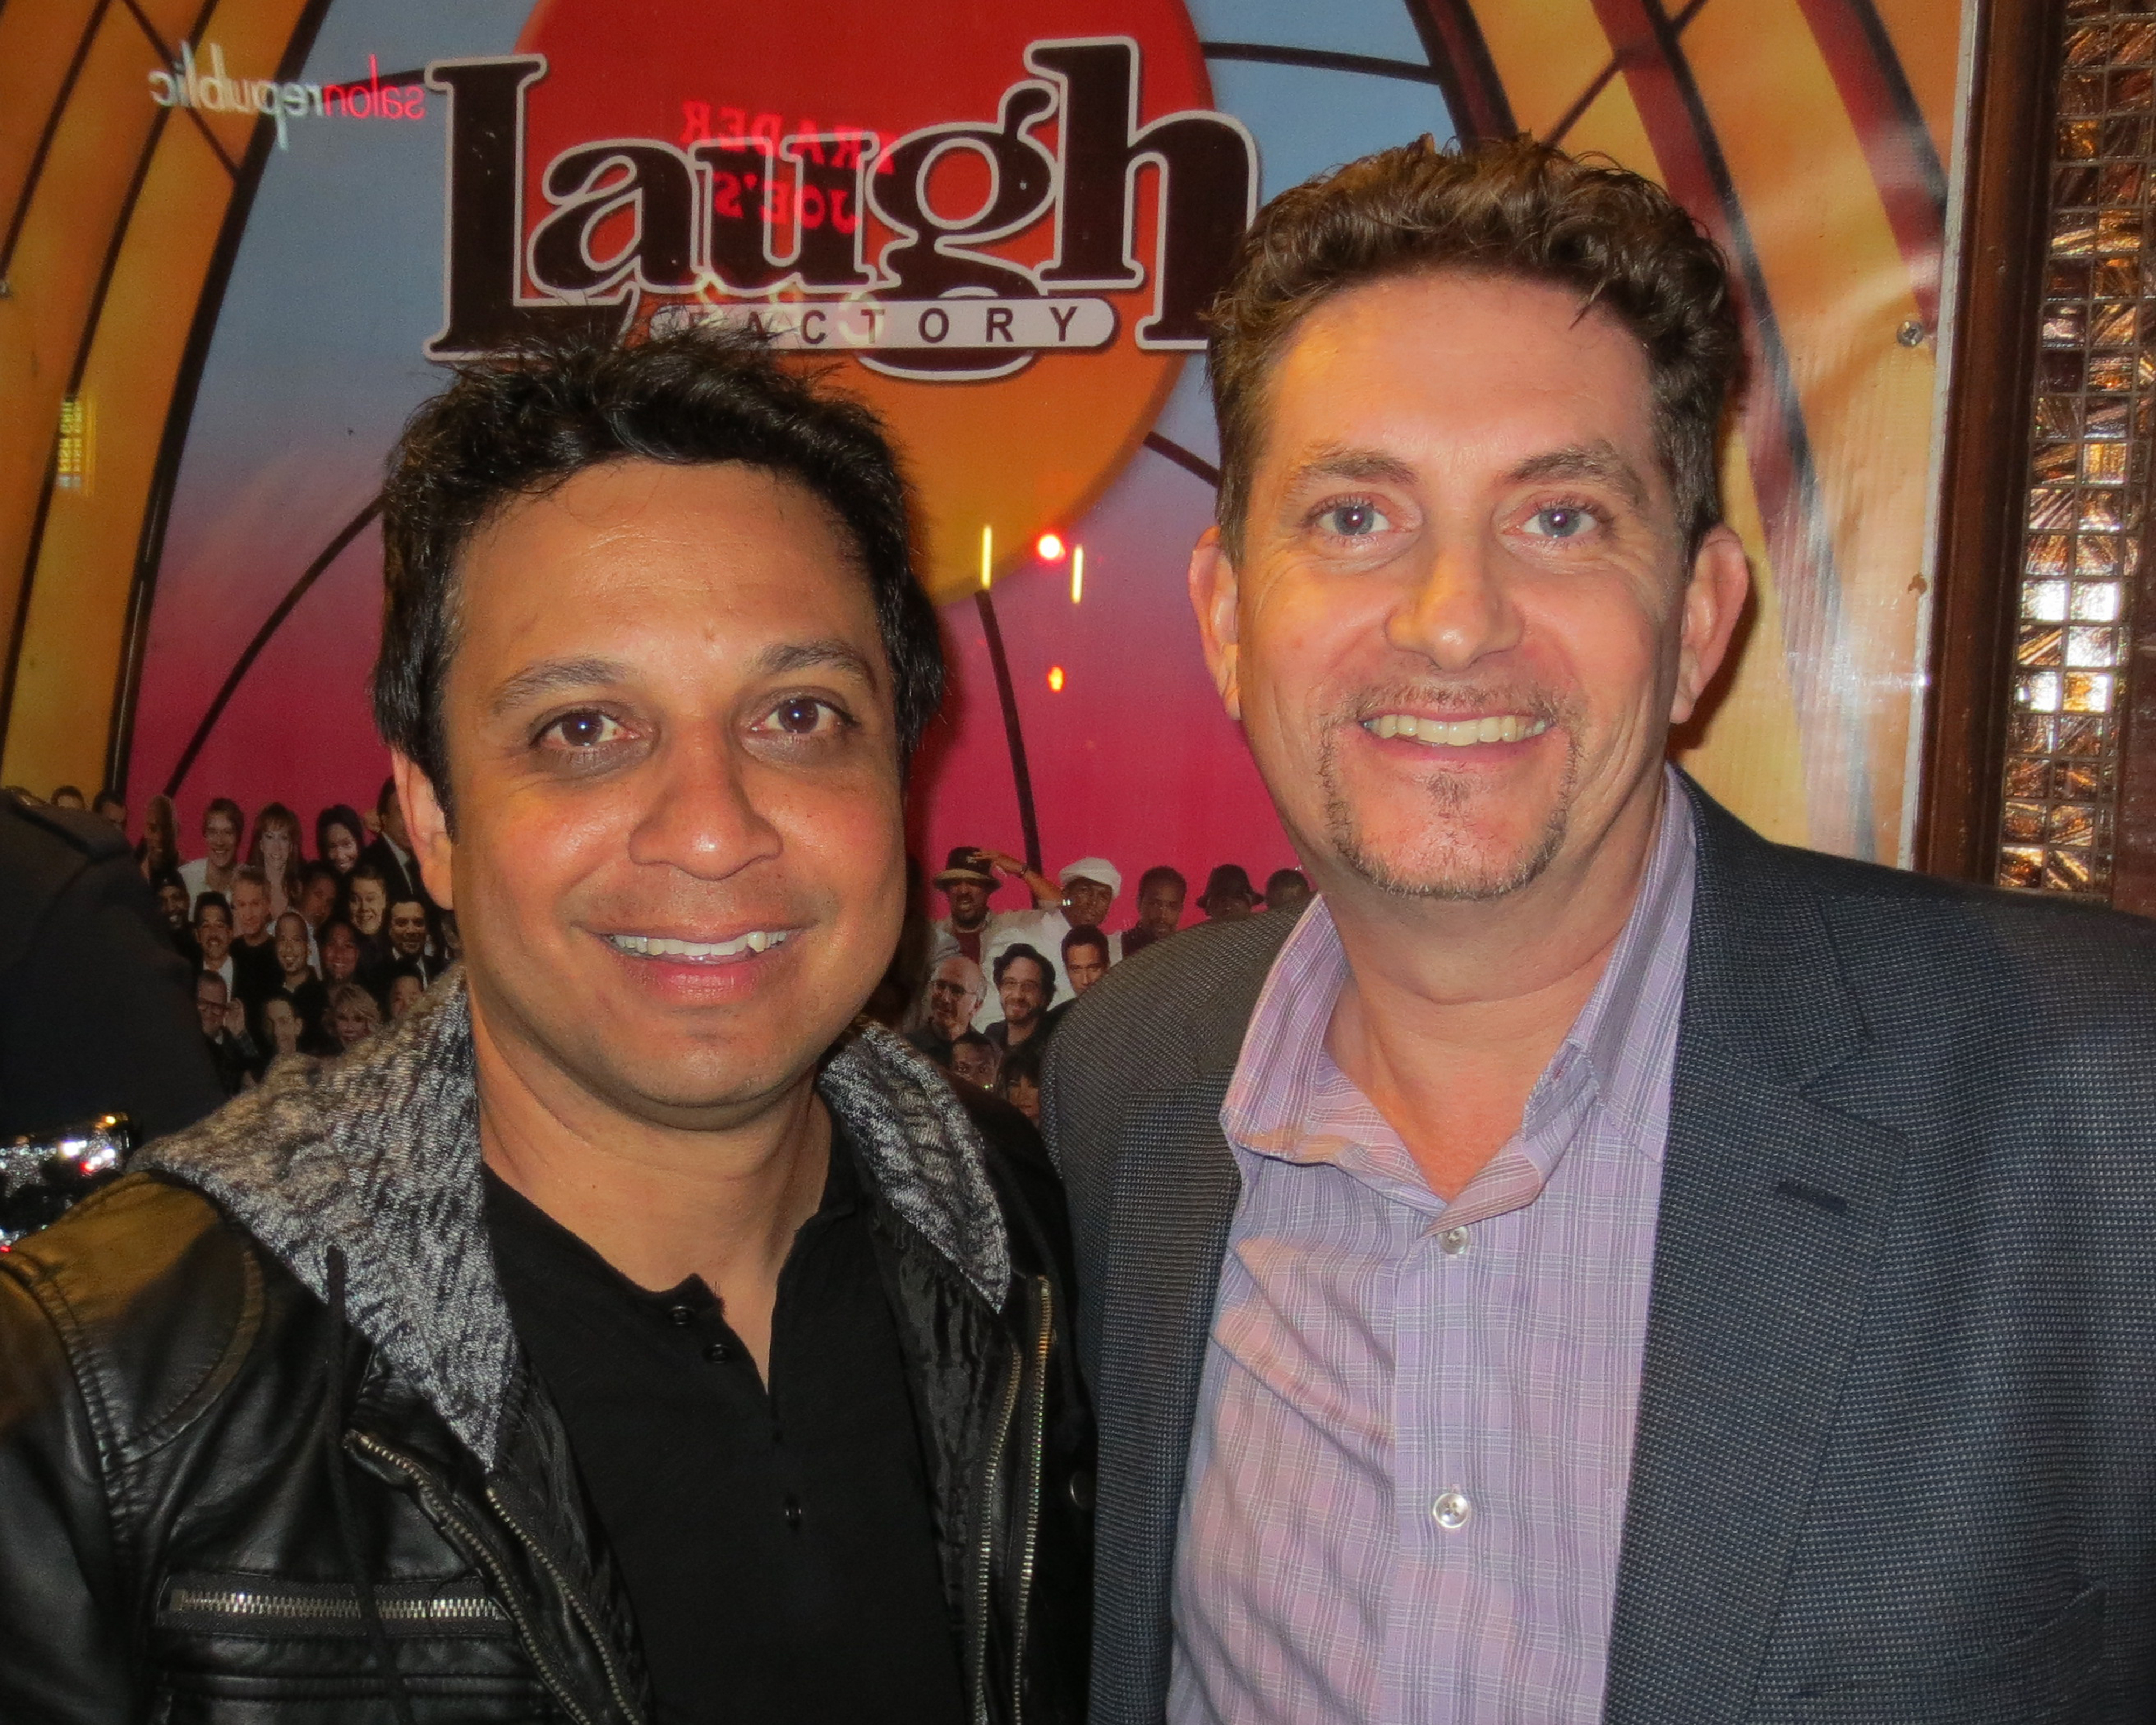 Comedian Johnny Sanchez and Actor Michael Christaldi at the Laugh Factory Comedy Club Hollywood Ca.